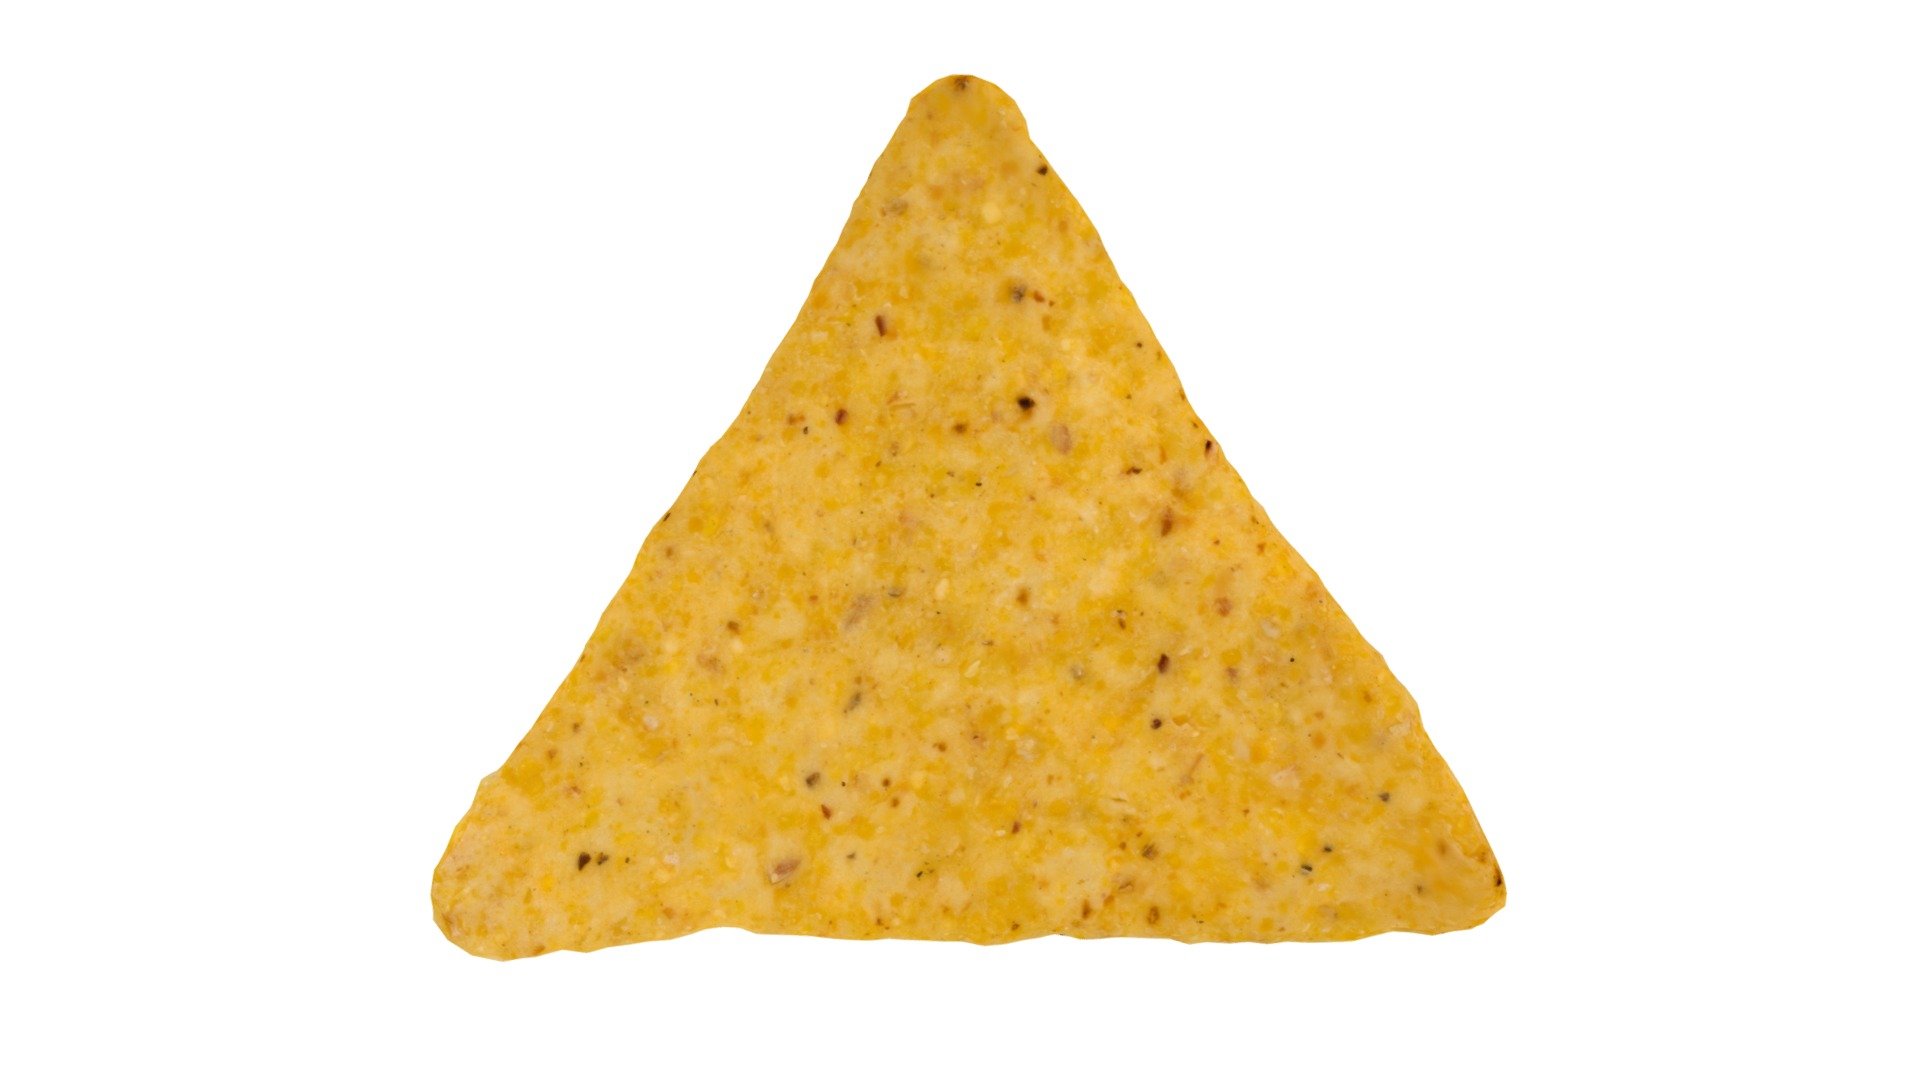 Highly detailed, photorealistic, 3d scanned model of a tortilla chip. 8k textures maps, optimized topology and uv unwrapped.

Model shown here is lowpoly with diffuse map only and 4k texture size.

This model is available at www.thecreativecrops.com 3d model